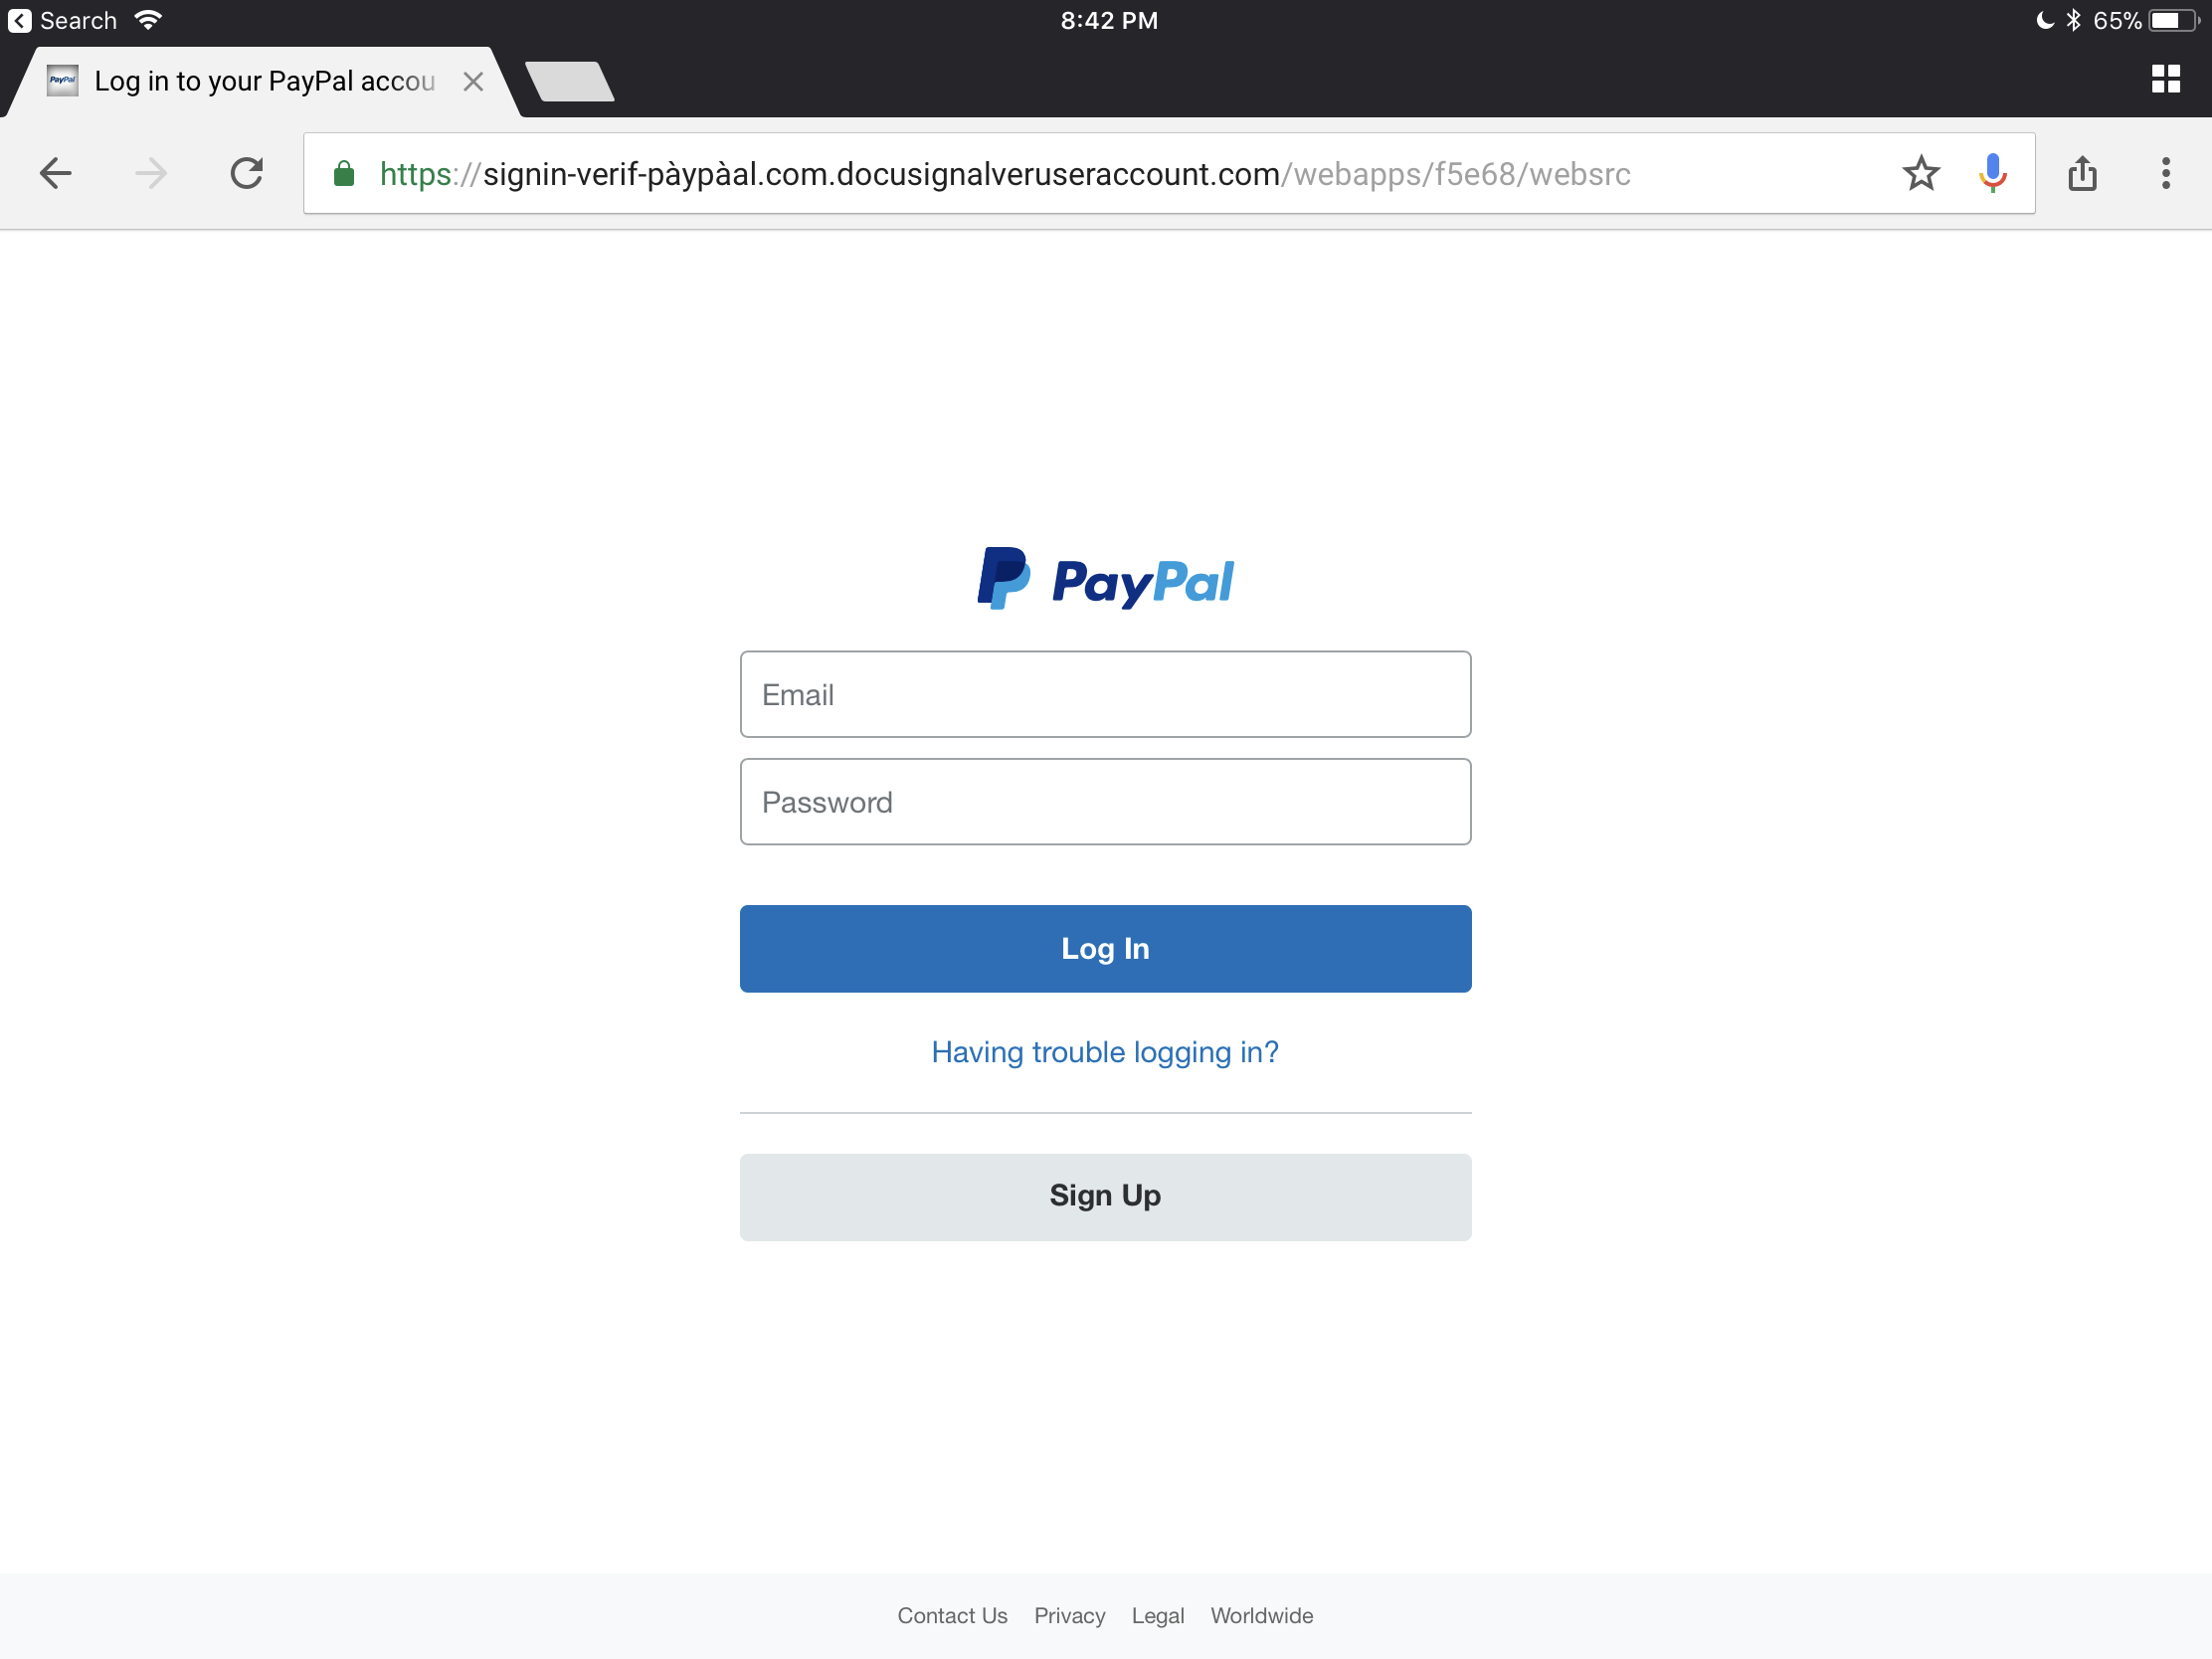 Solved: Examples of Suspected Fraud or Fake Emails - Page 7 - PayPal  Community